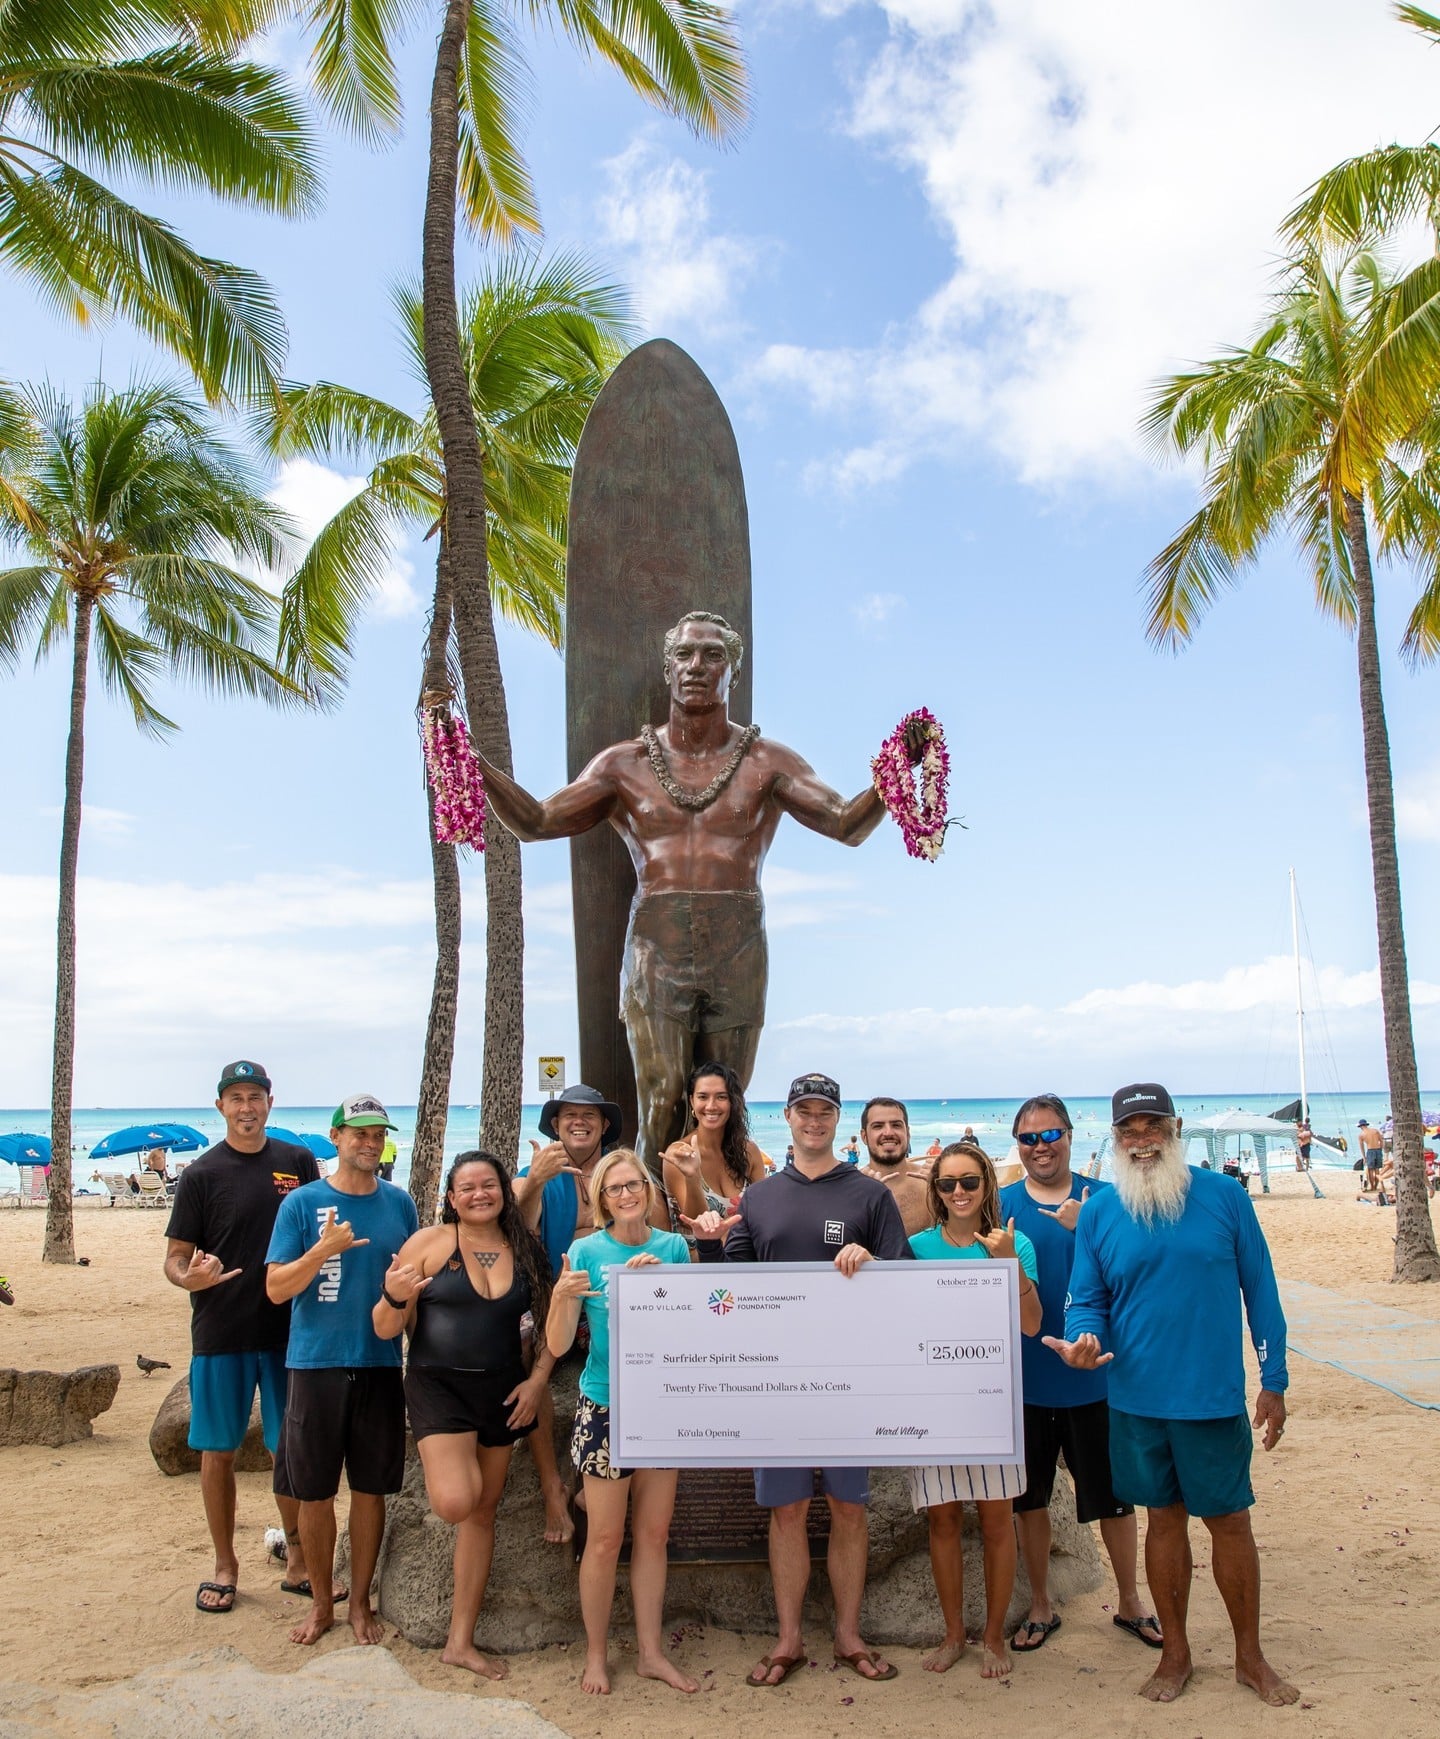 To celebrate the opening of Kōʻula, Ward Village donated $25,000 to @surfriderspiritsessions, aiding in the creation and implementation of holistic ocean-based education, mentoring programs and activities that support youth facing barriers.